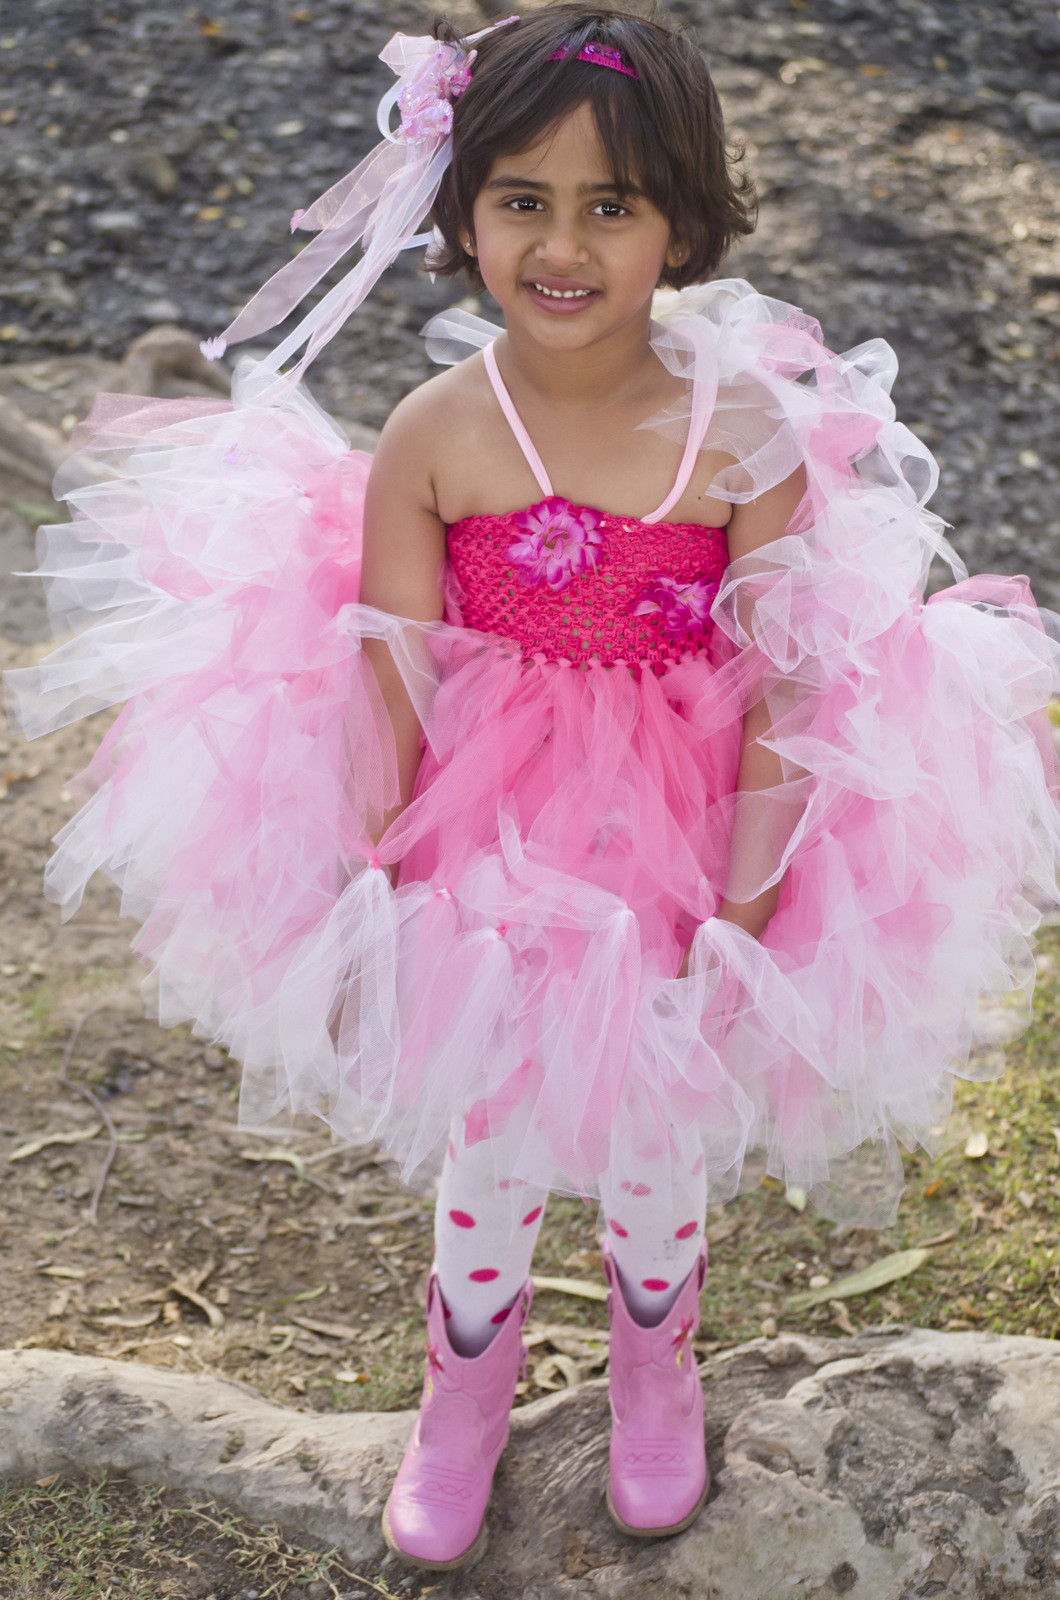 DIY Ballerina Costume
 So pink and poufy All girly